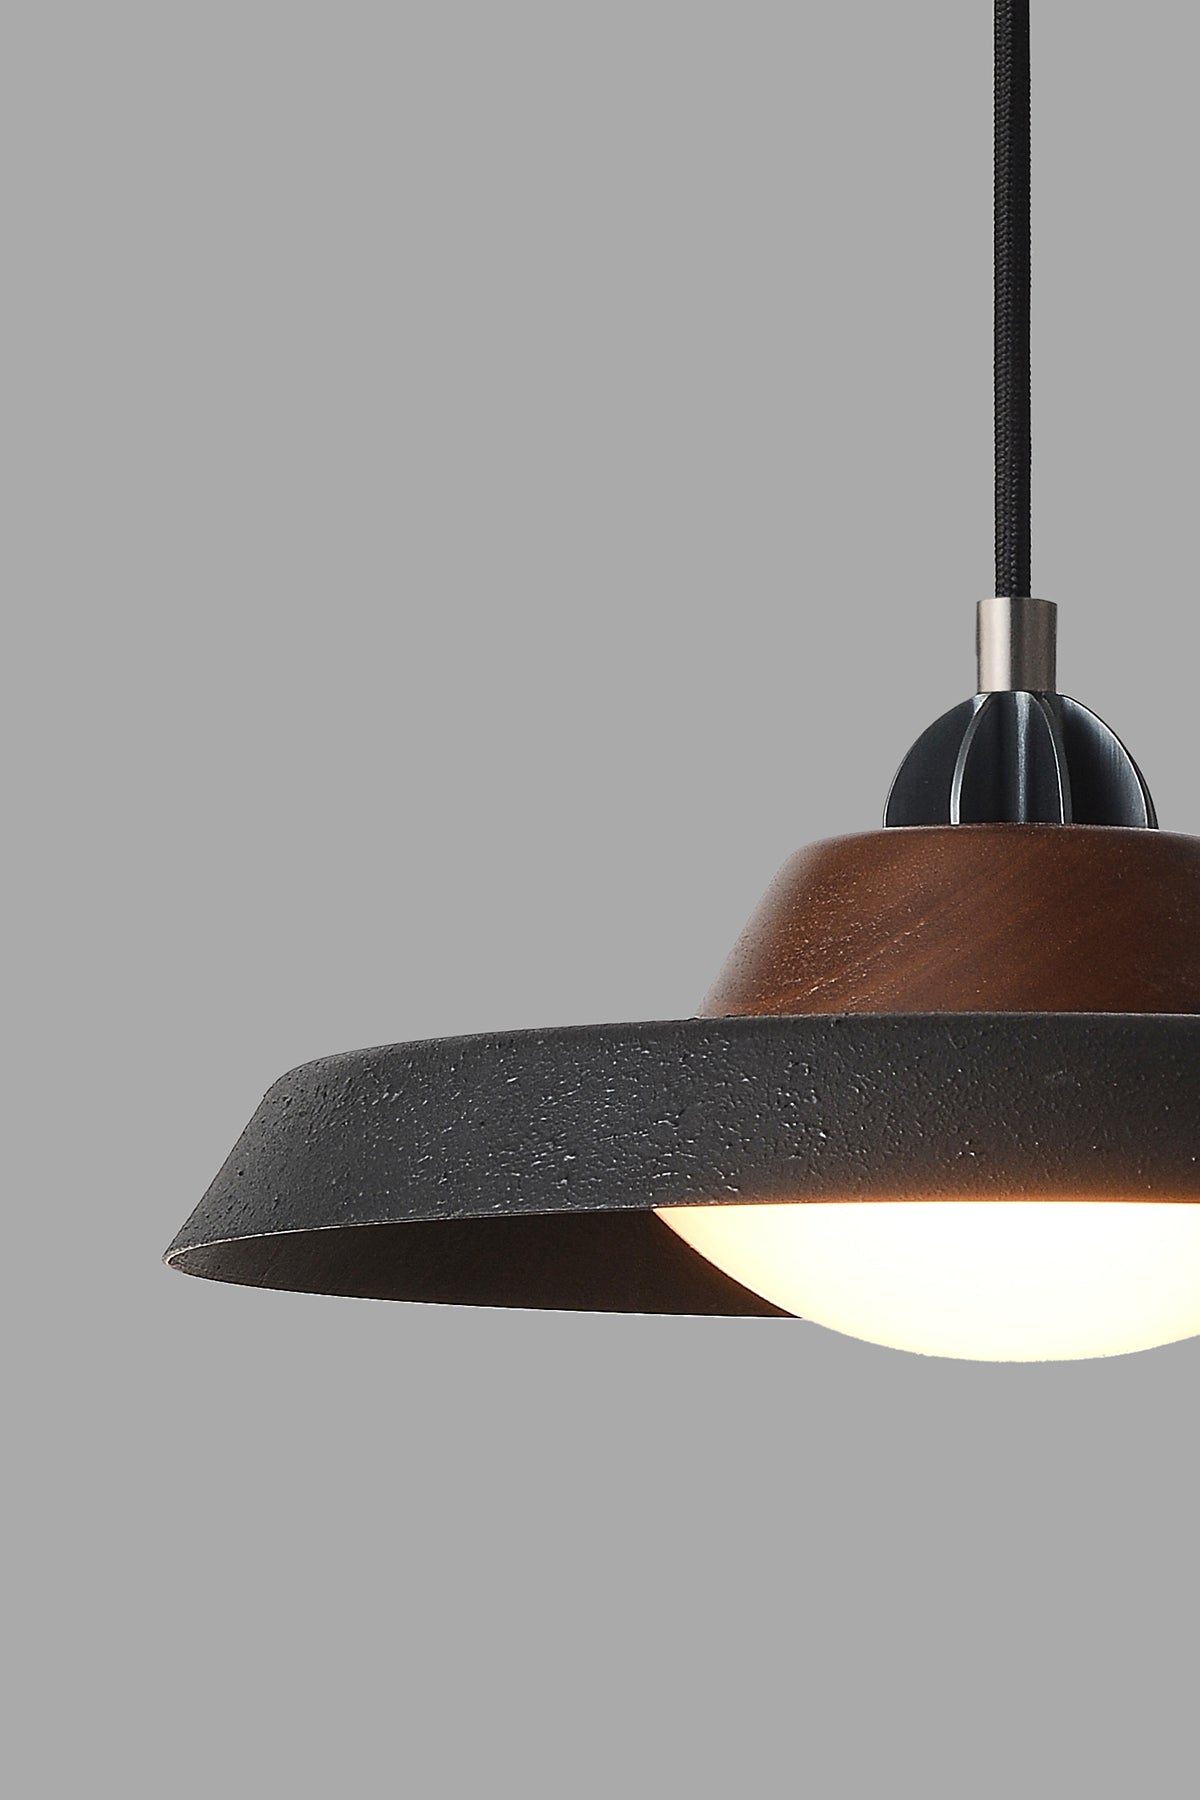 Modern industrial pendant with warm LED bulb